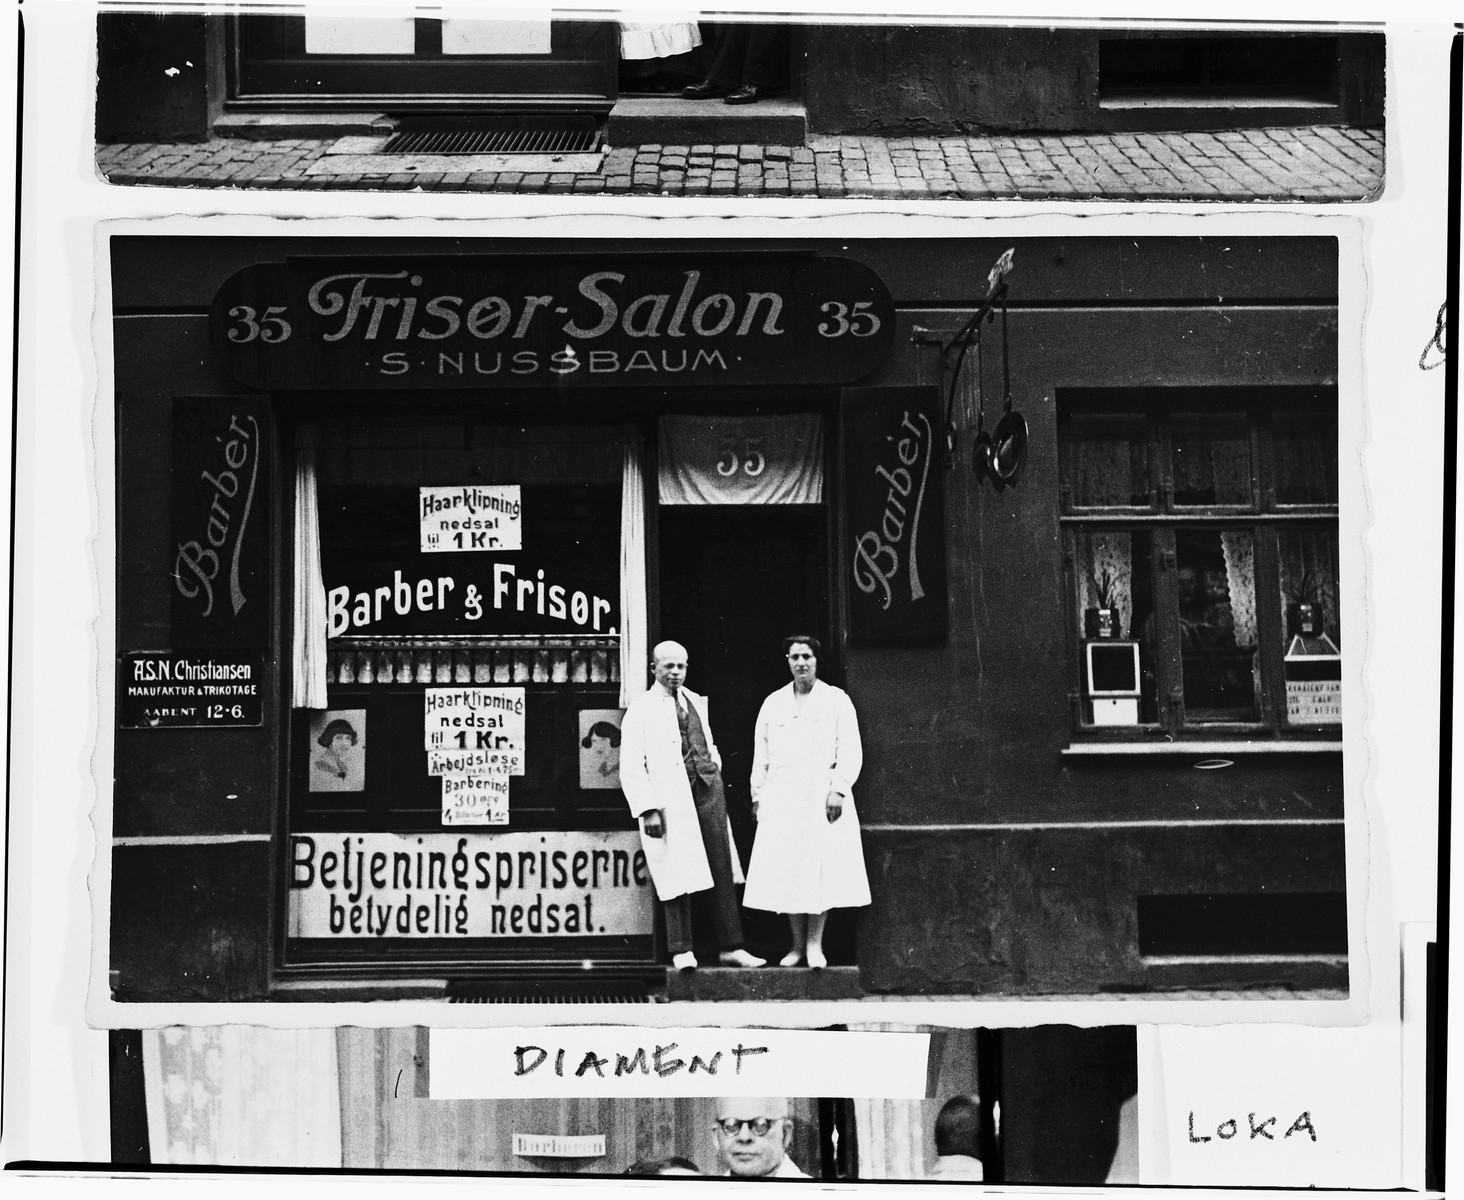 A Jewish couple poses in the doorway of their newly renovated barbershop located on the Ochenschlagergade in Copenhagen.

Pictured are Saul and Chane Nussbaum, who live in the same building.